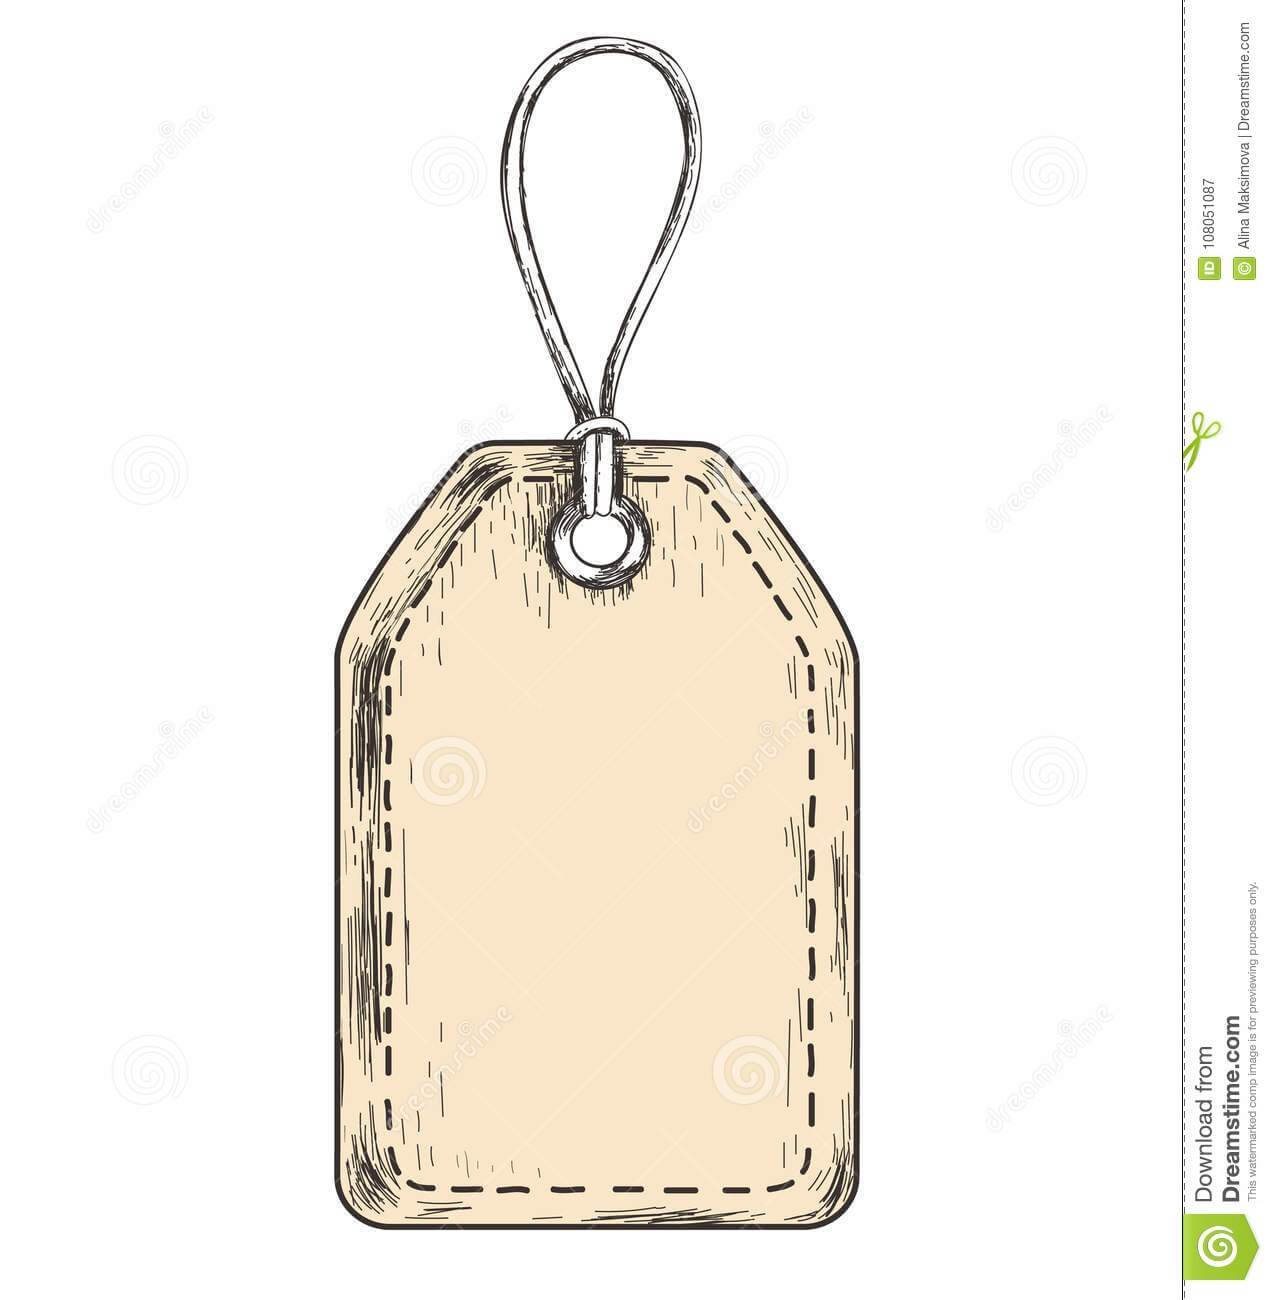 Sketch Tag For Sales. Stock Vector. Illustration Of Luggage For Blank Luggage Tag Template